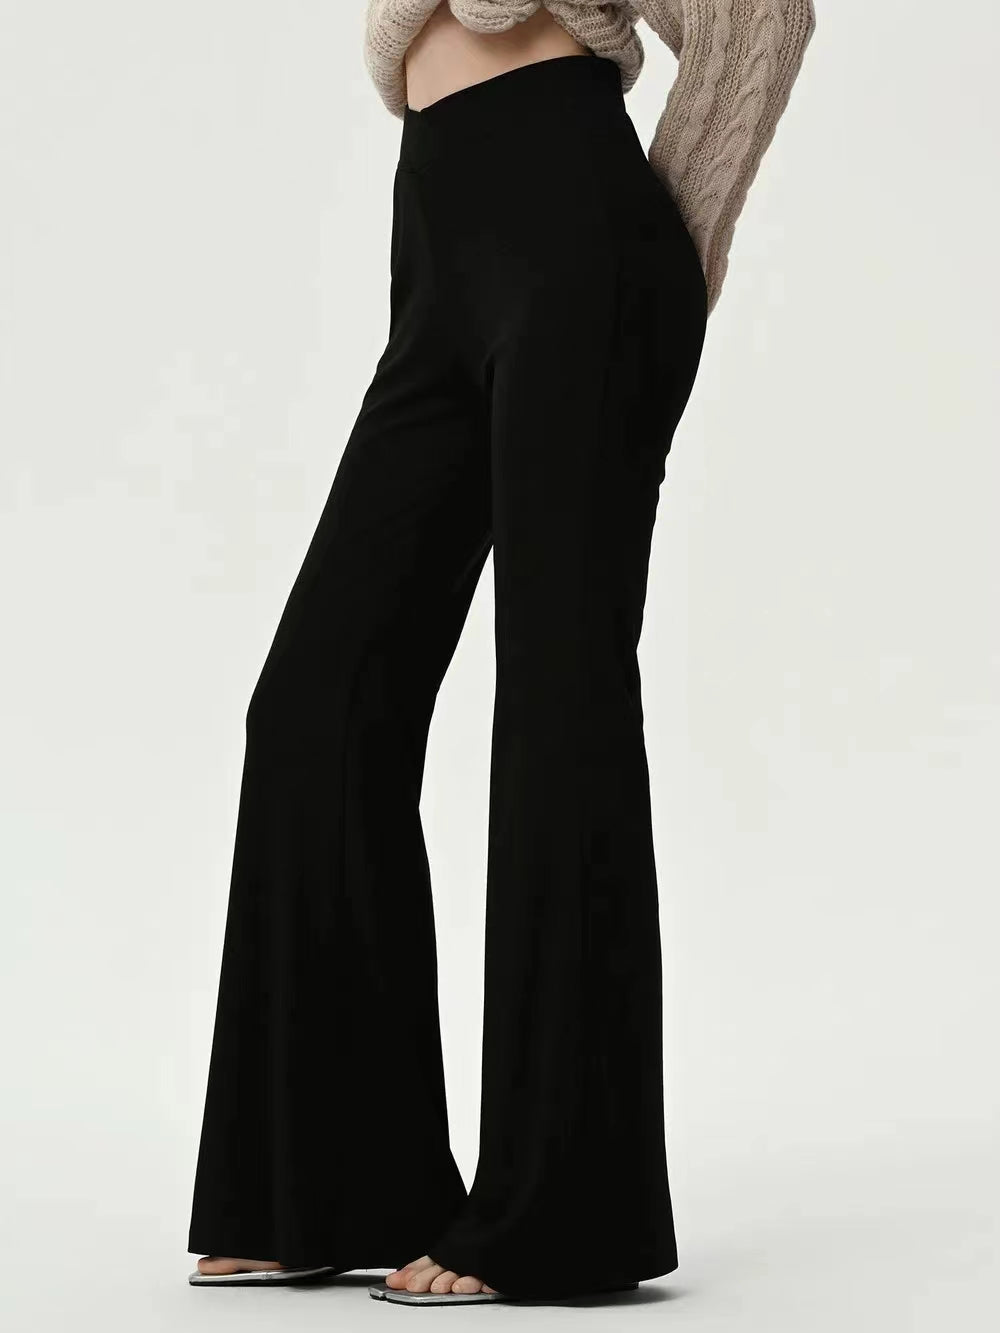 Black Floral Lace Sheer High Waist Flare Cover Up Pants - Hot Miami Styles